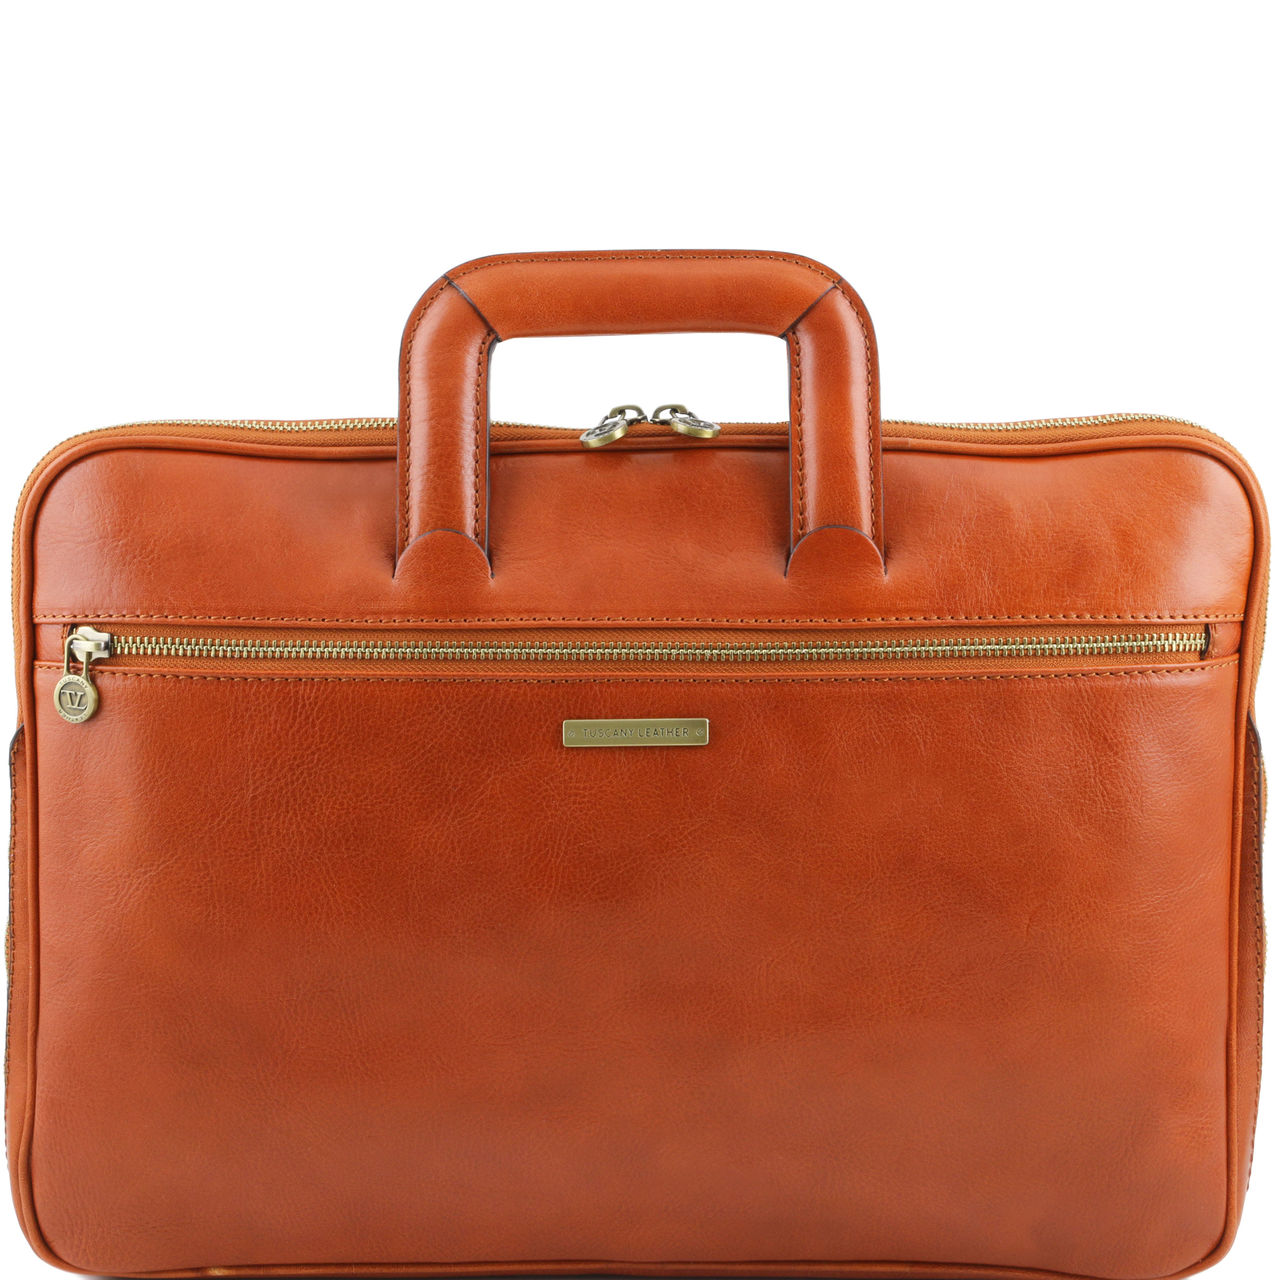 Tuscany Leather Caserta Leather Document Briefcase